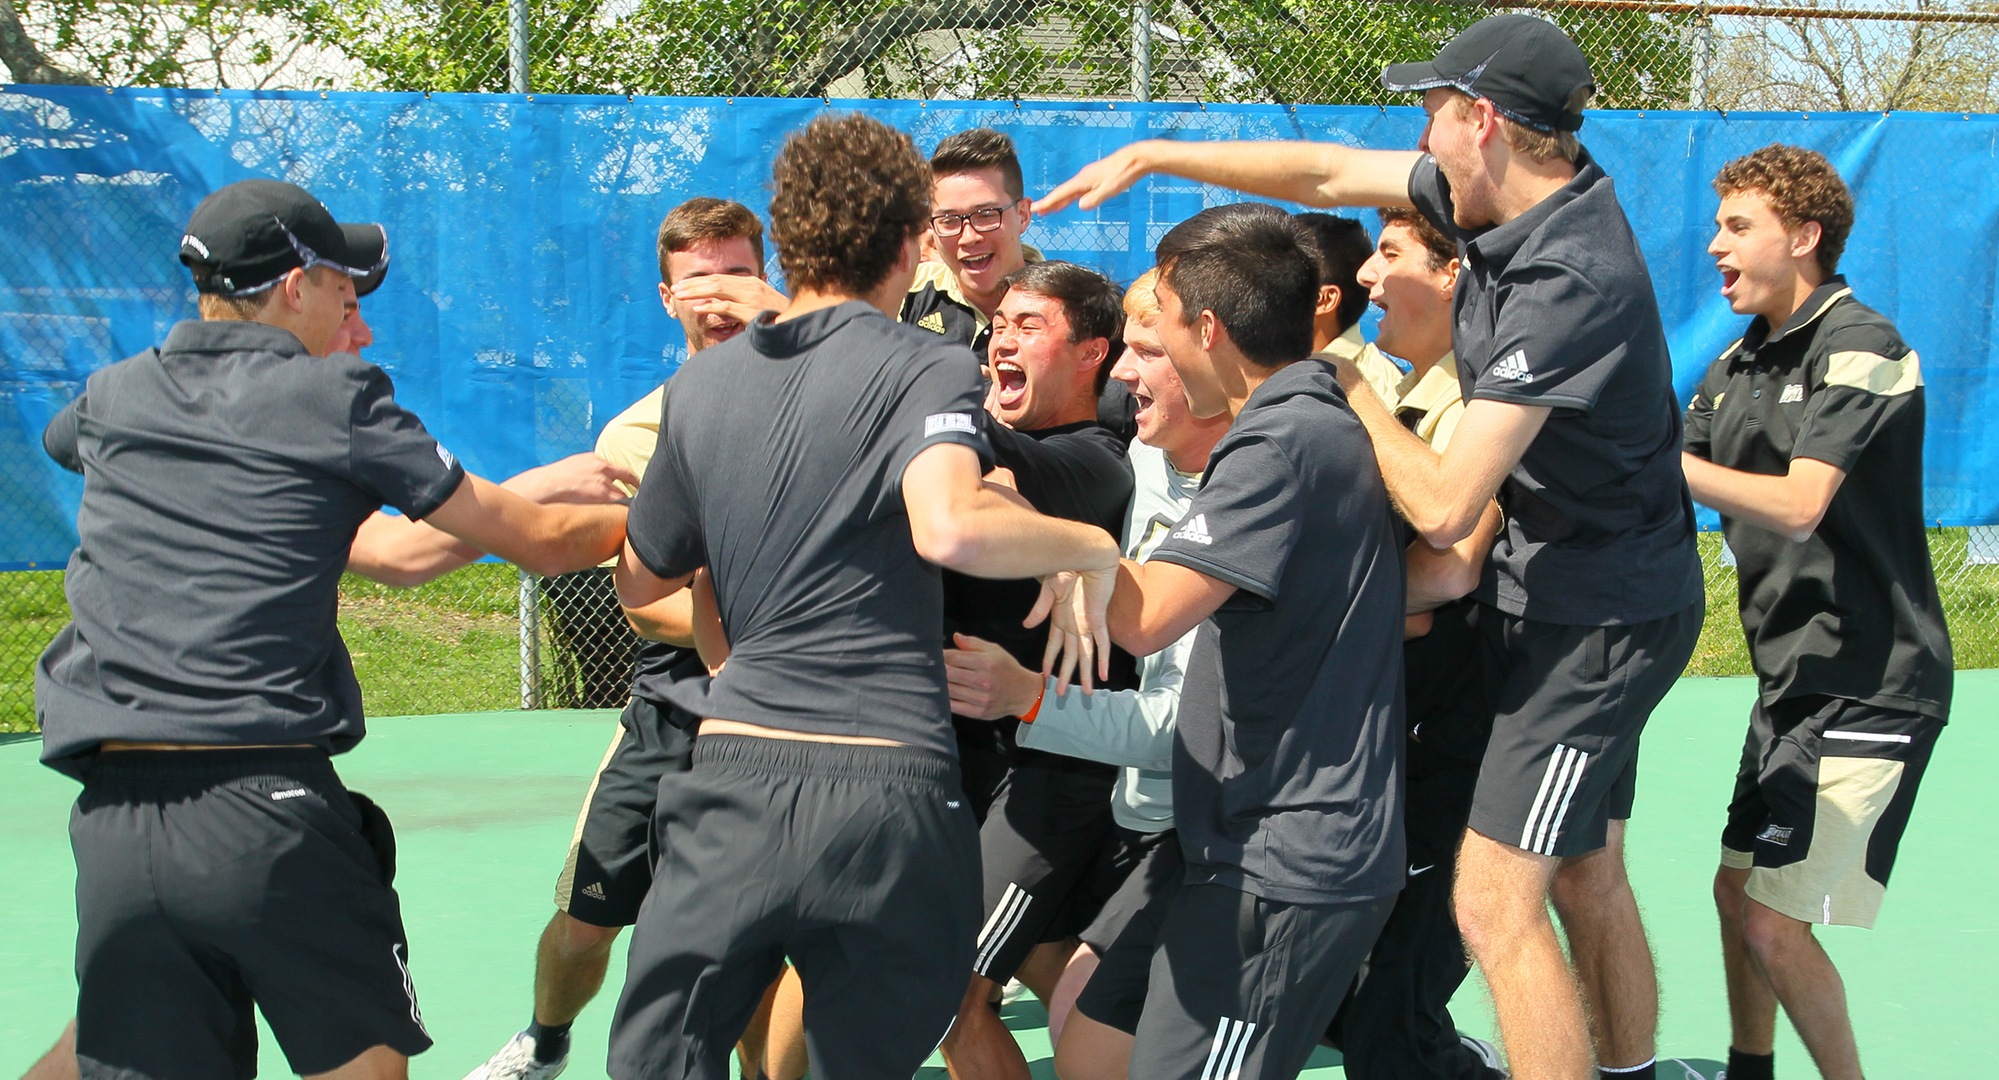 Bulldogs four-peat in NEC Championship, defeat Red Flash, 4-1